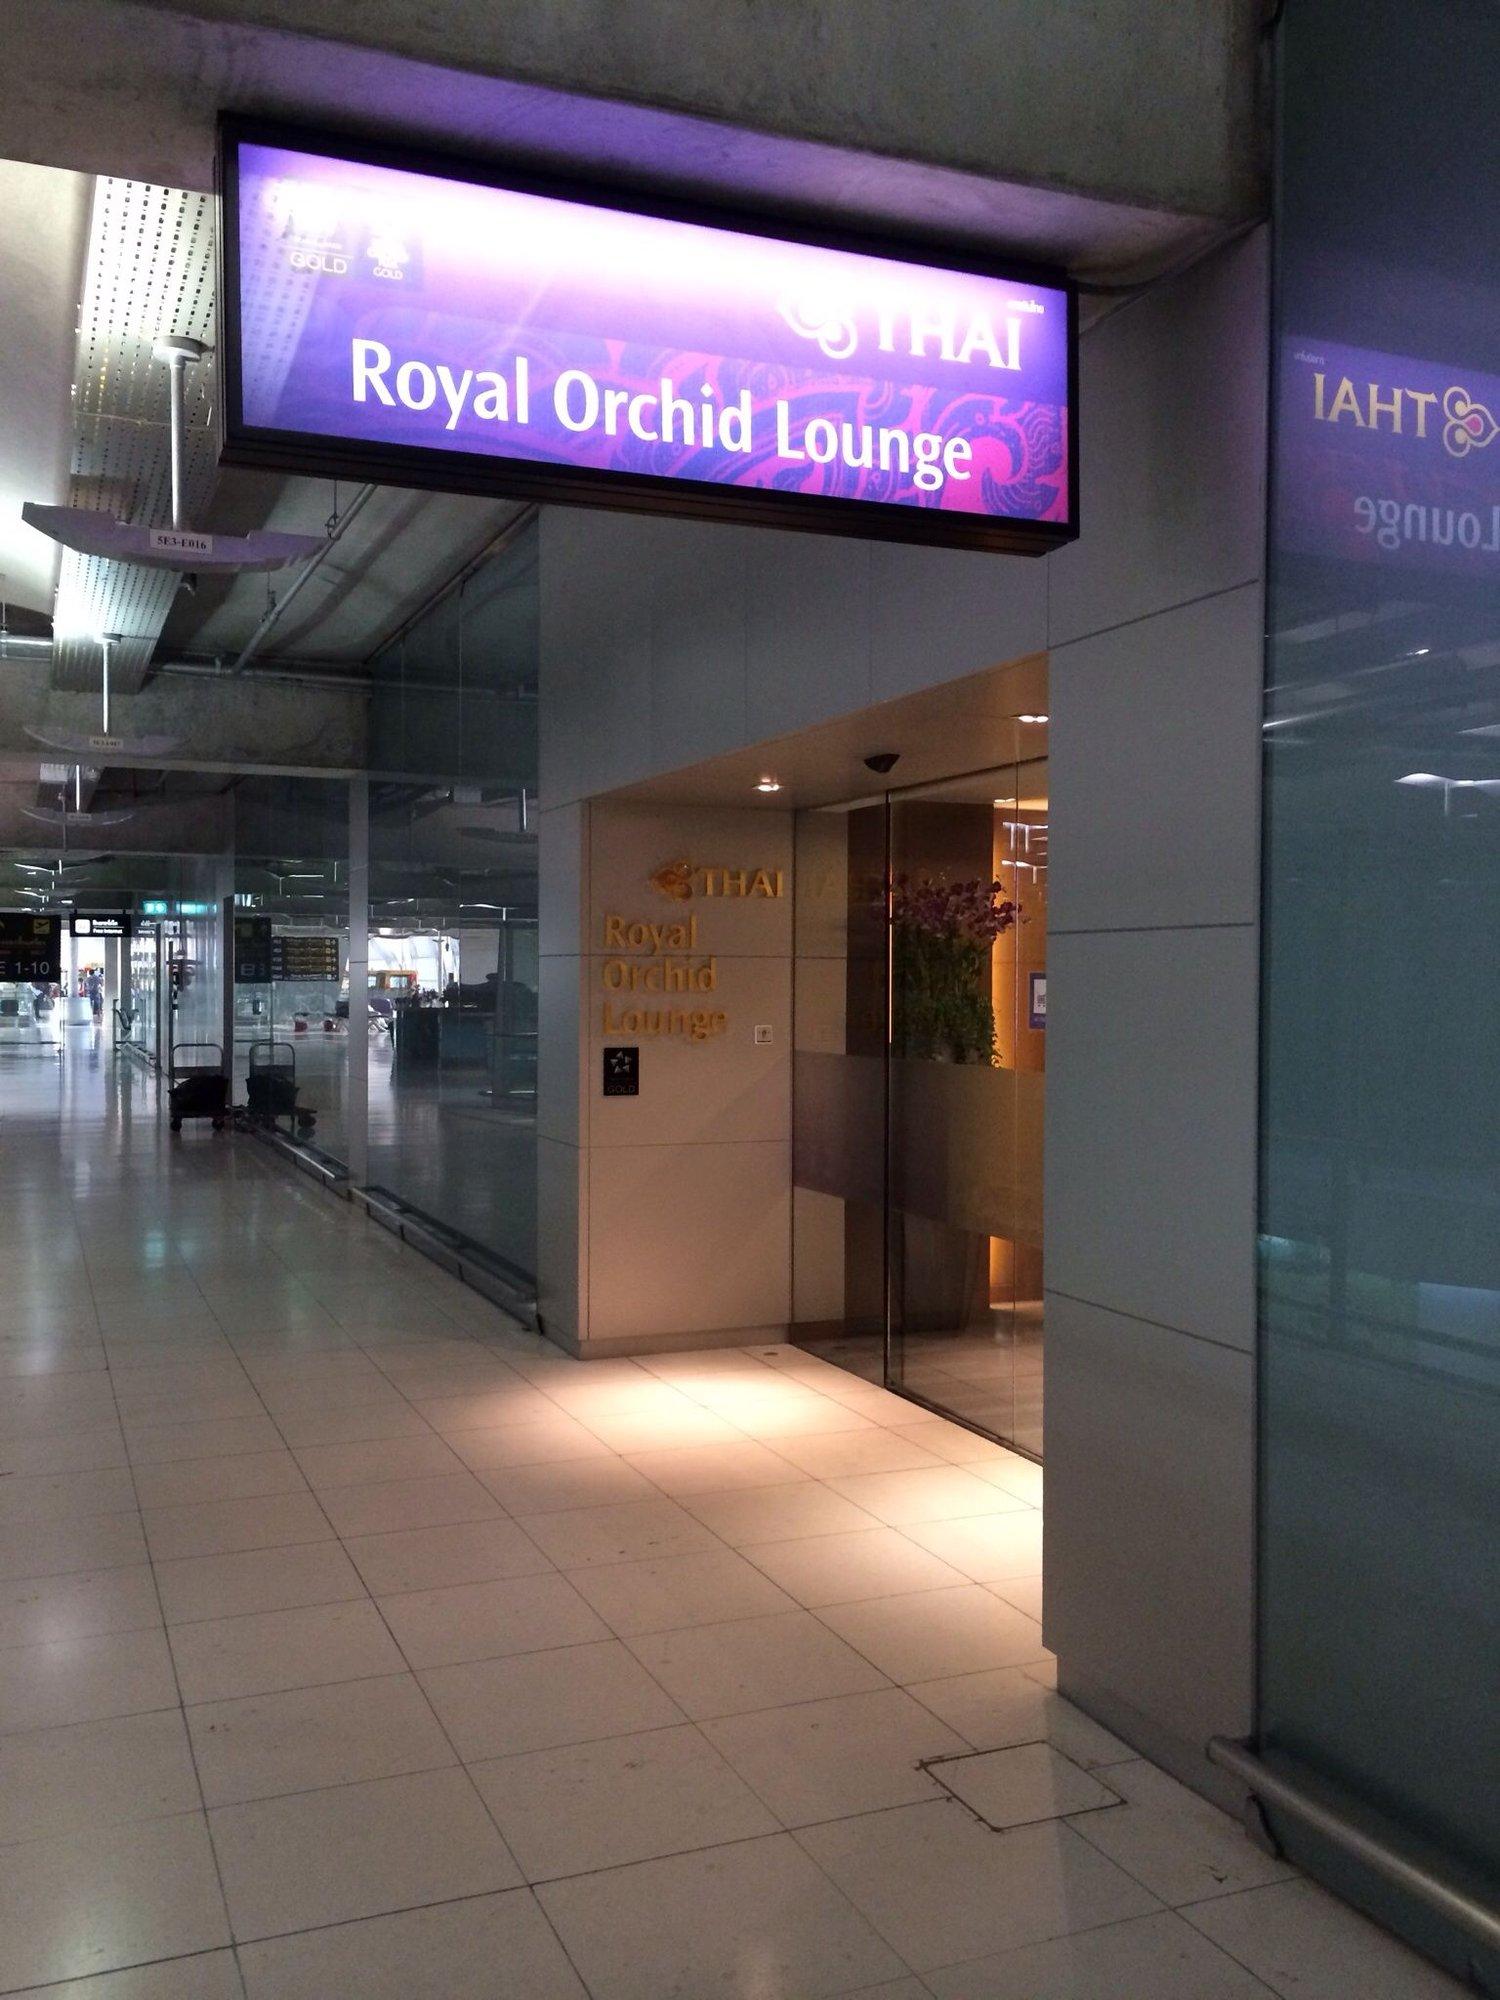 Thai Airways Royal Orchid Lounge image 1 of 15